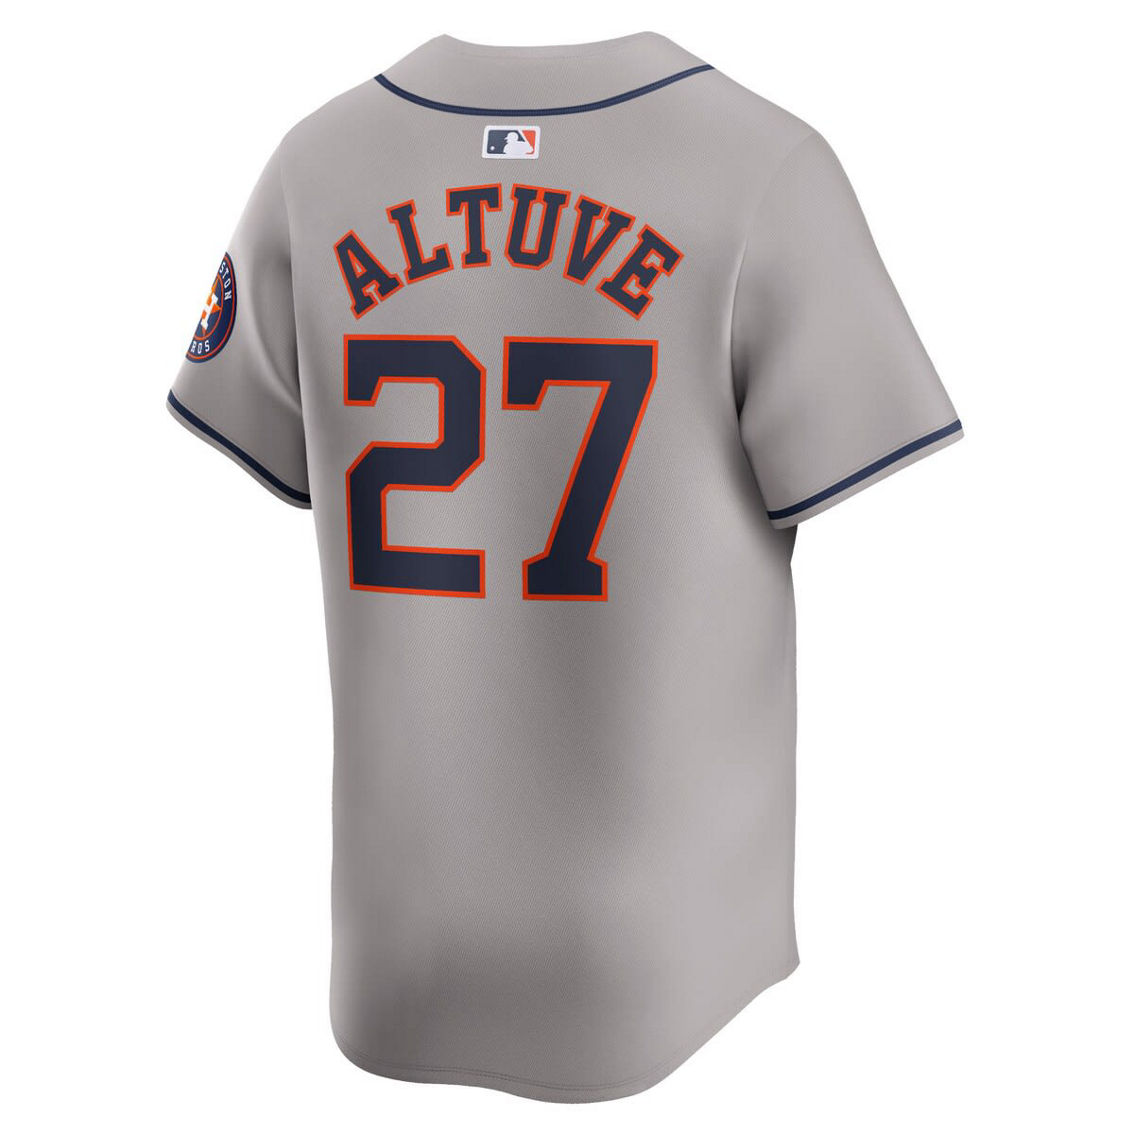 Nike Men's Jose Altuve Gray Houston Astros Away Limited Player Jersey - Image 4 of 4